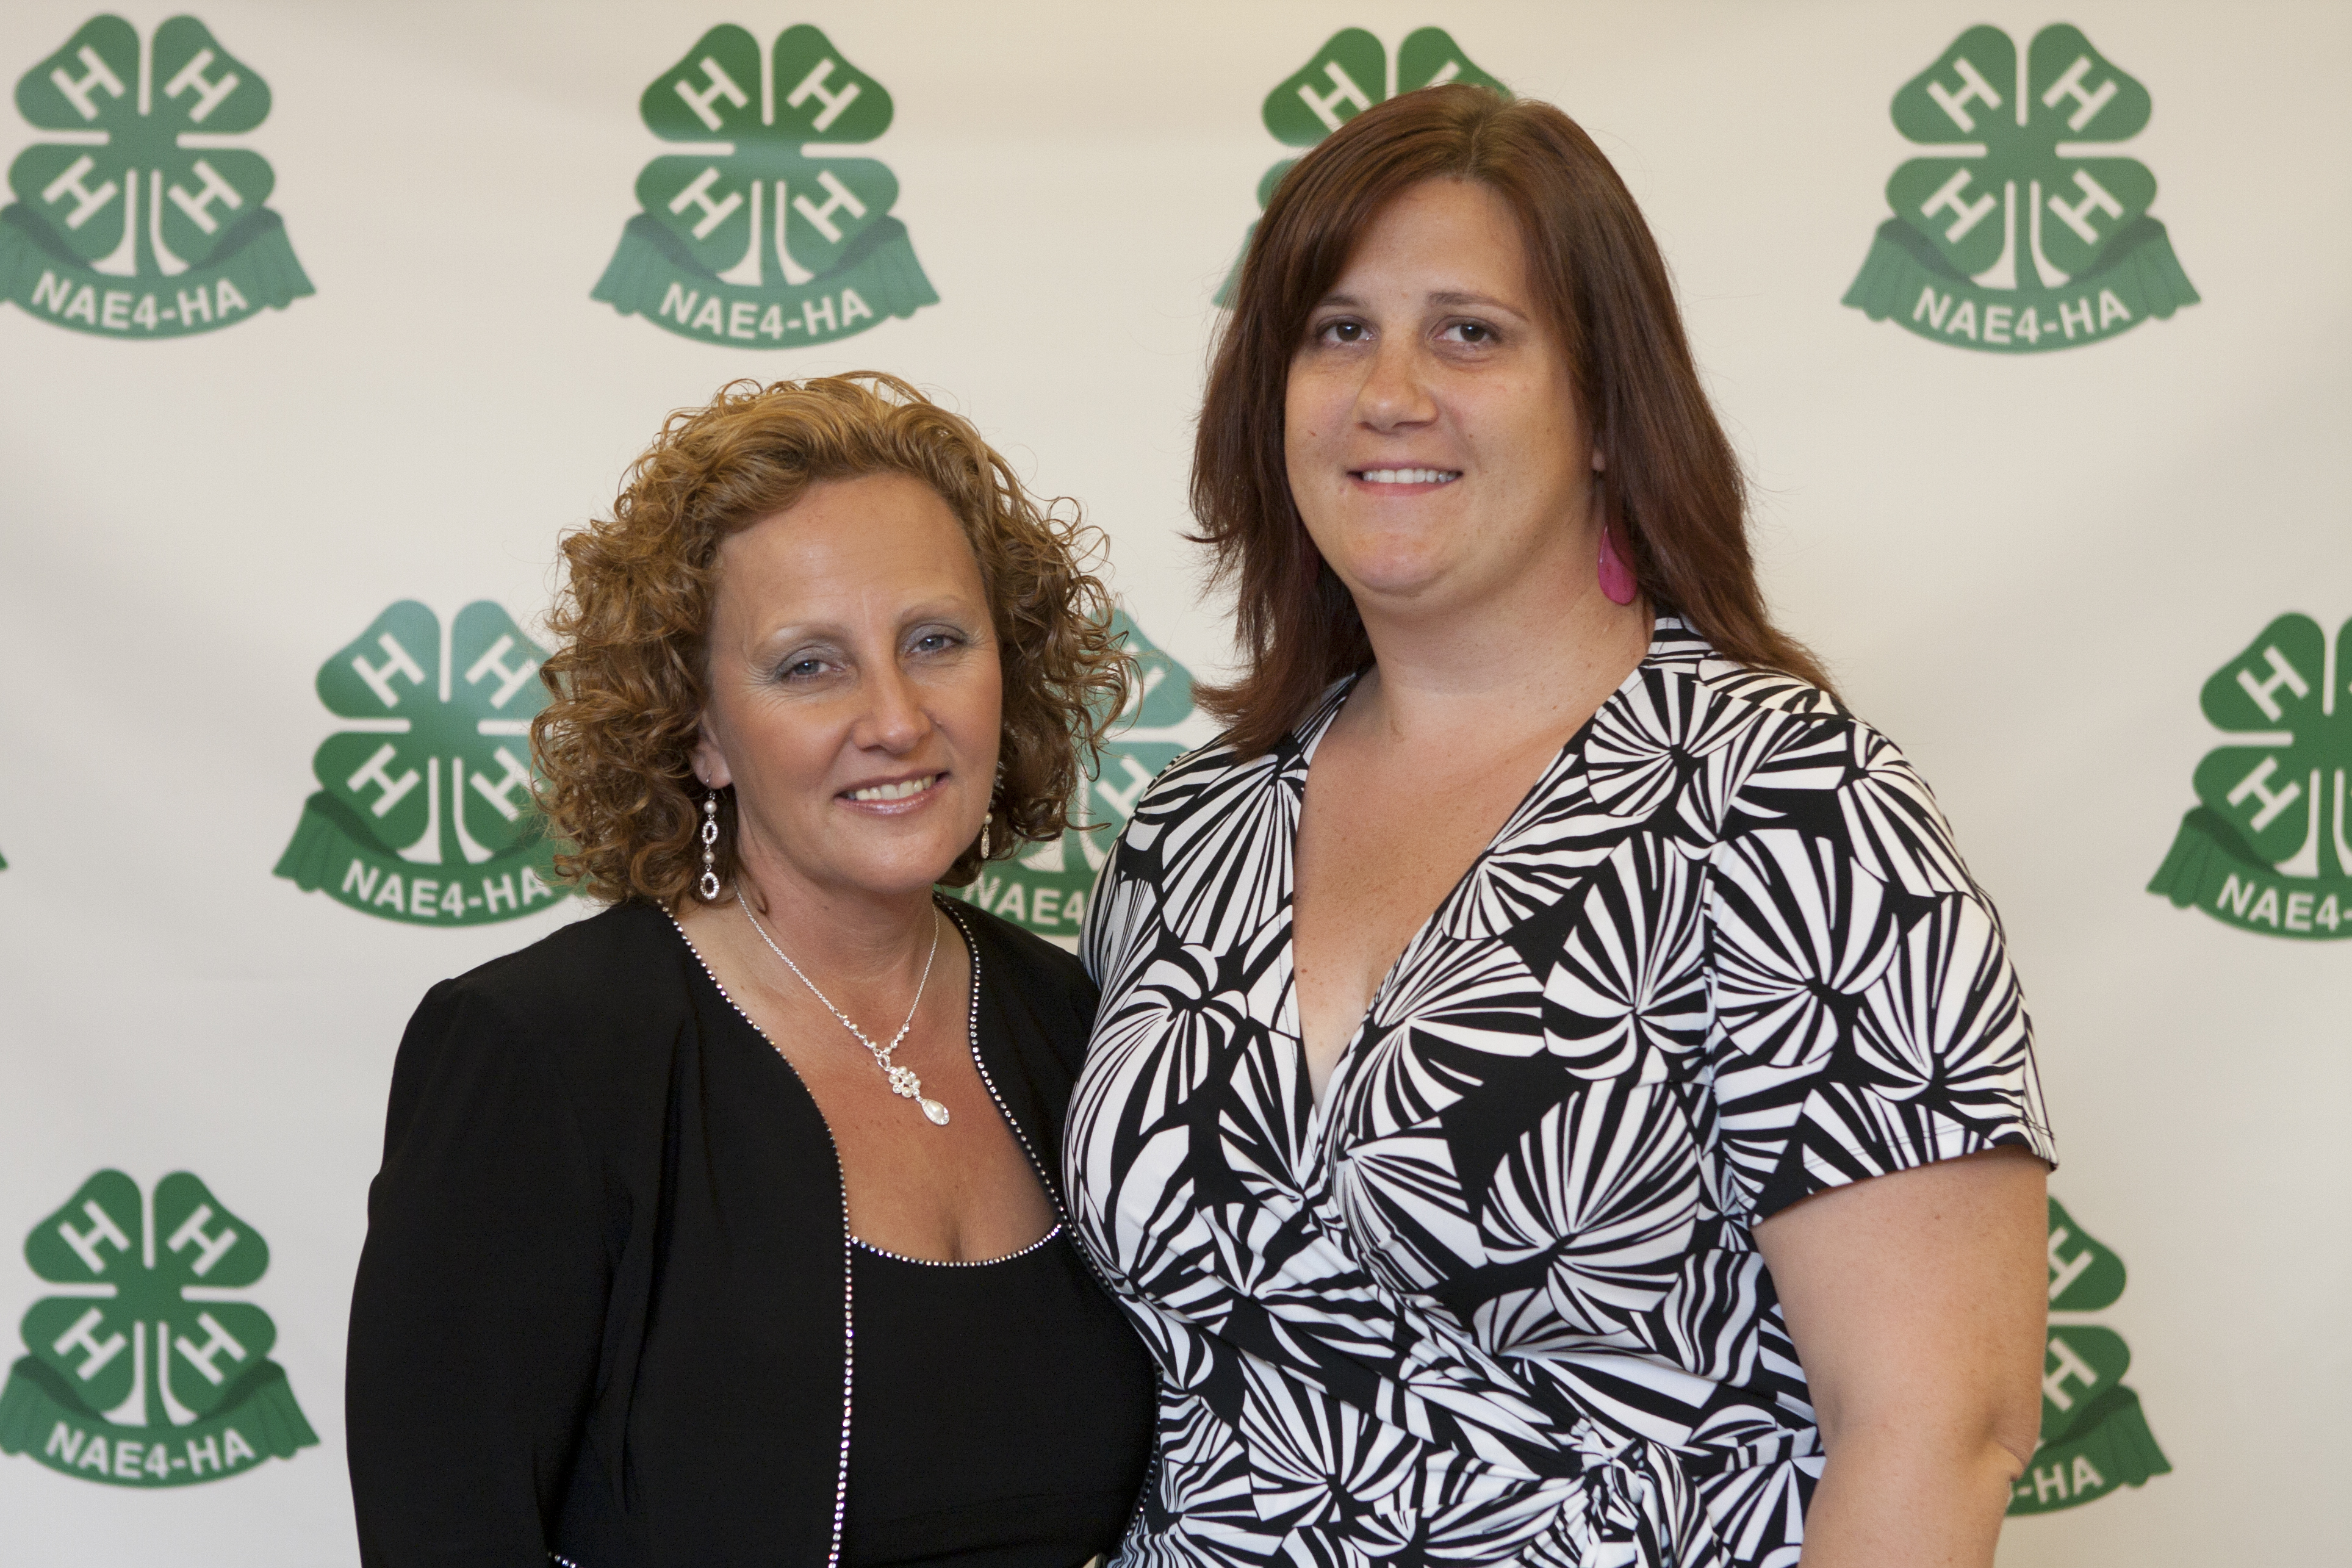 National Association of Extension 4-H Agents President Debbie Nistler, left, congratulates Samantha Roth, recipient of the Achievement in Service Award.